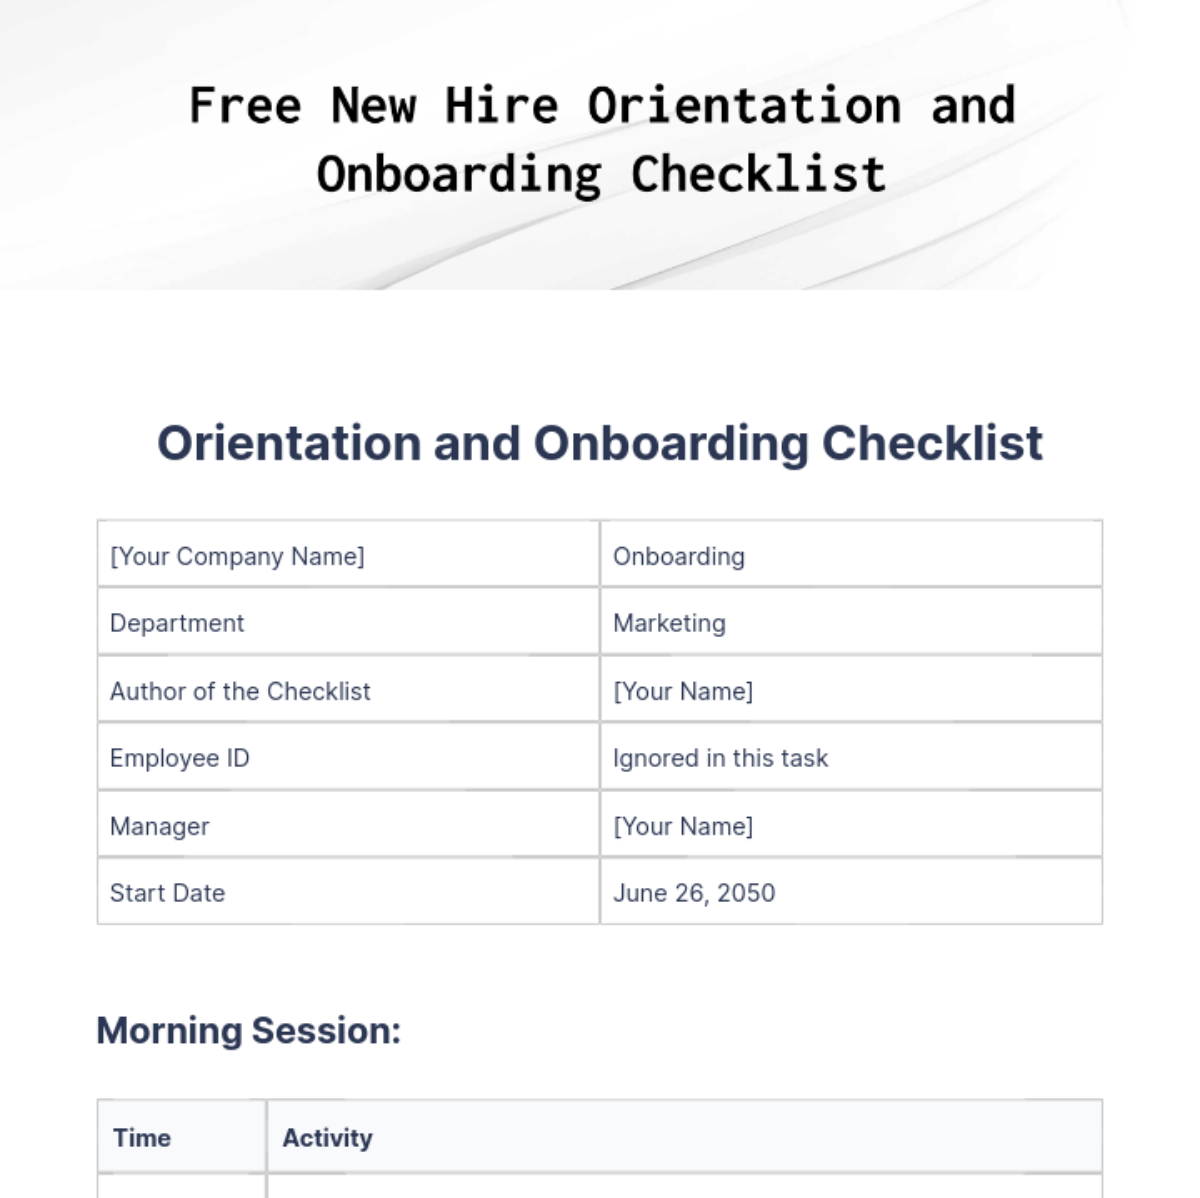 Free New Hire Orientation and Onboarding Checklist Template